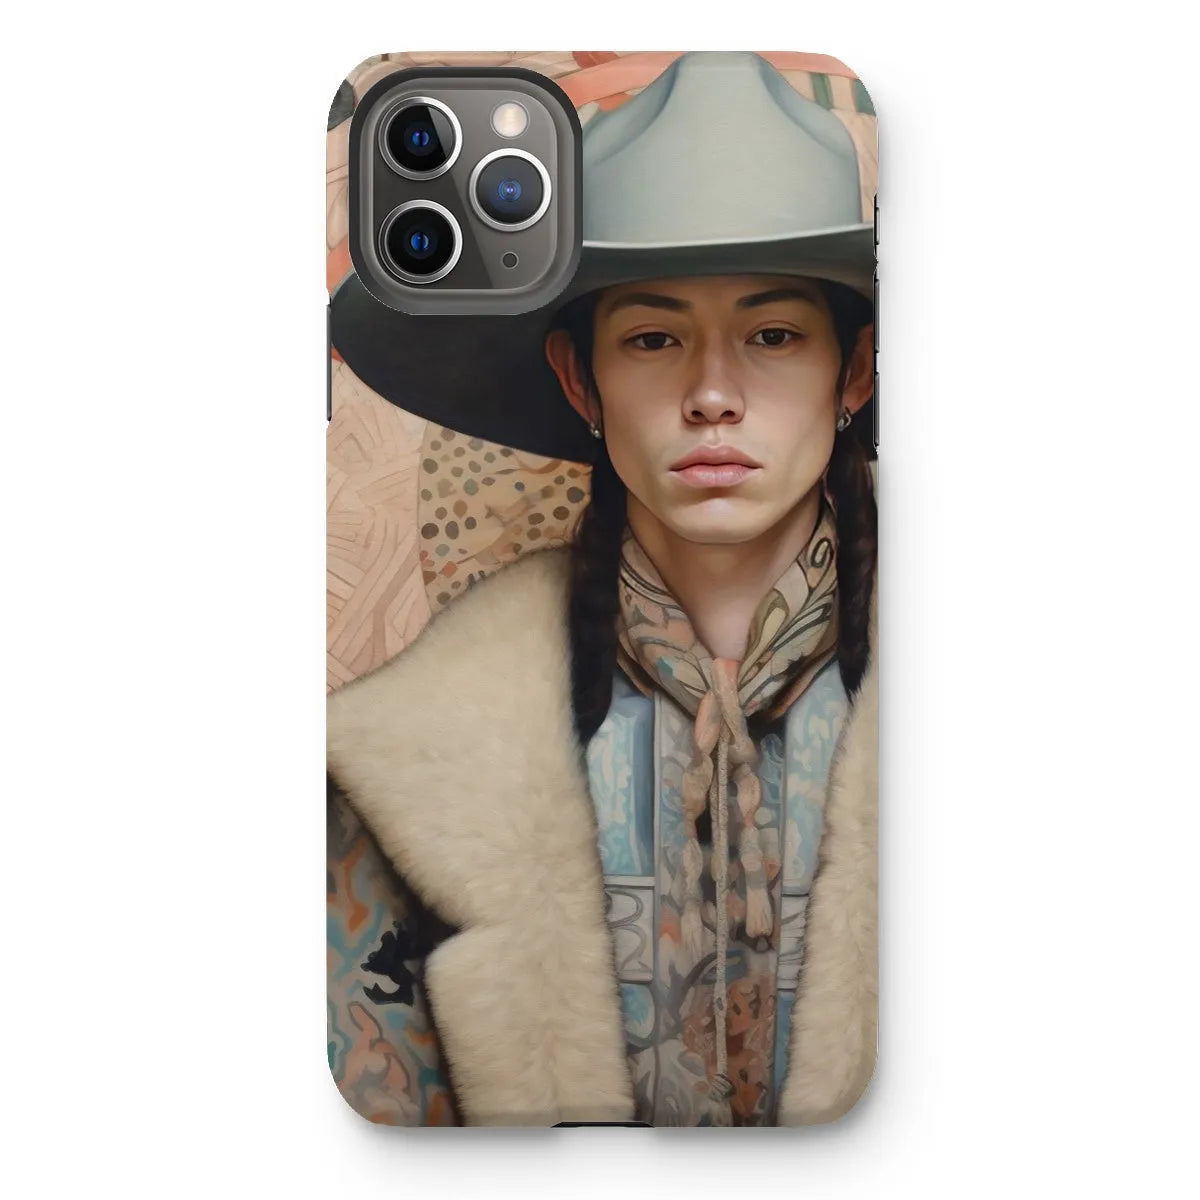 Jacy The Gay Cowboy - Dandy Gay Aesthetic Art Phone Case - Iphone 11 Pro Max / Matte - Mobile Phone Cases - Aesthetic